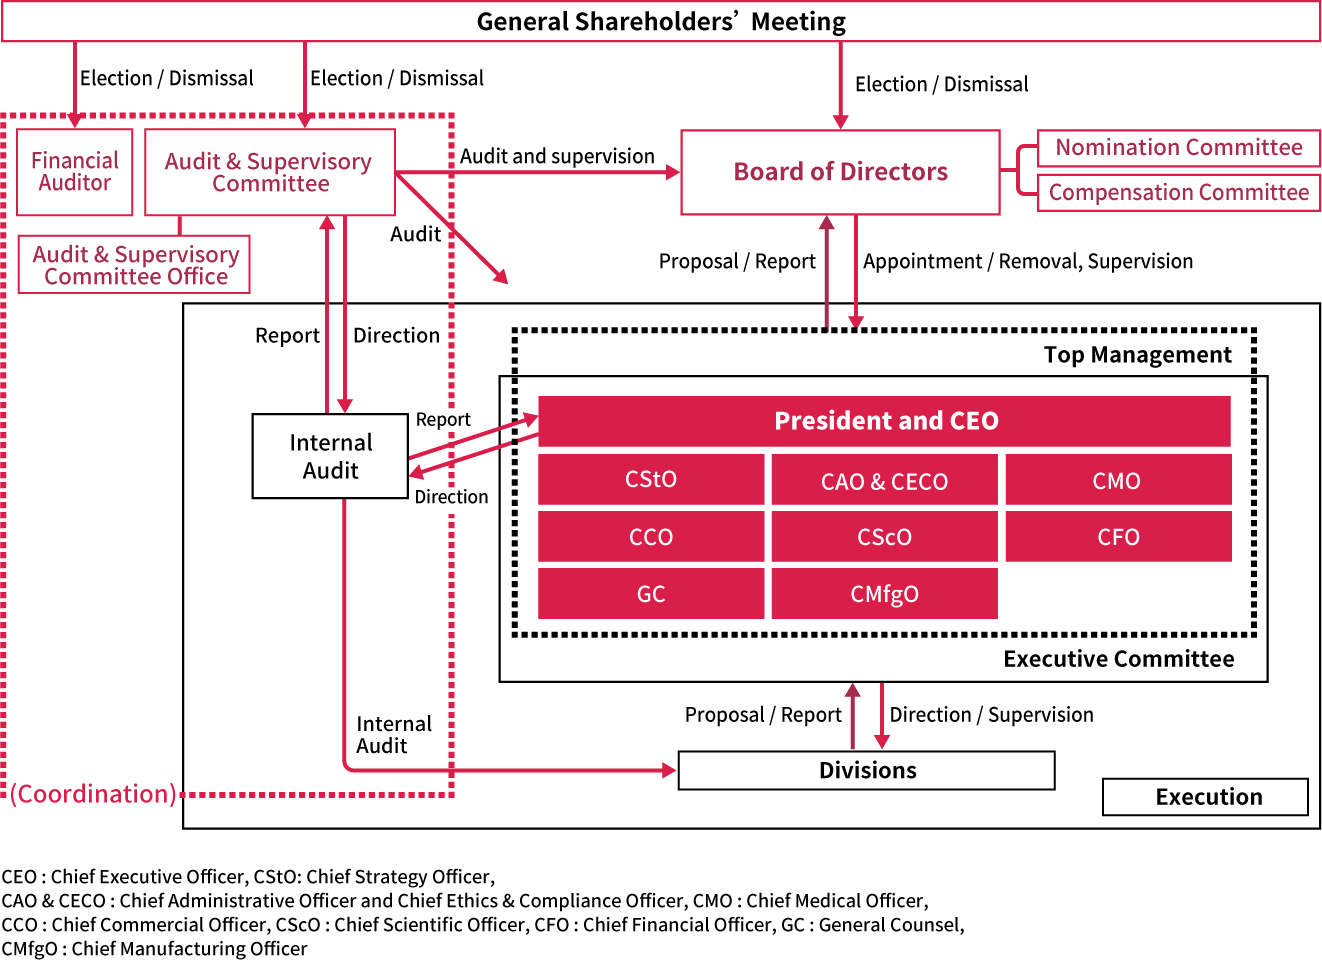 Diagram of Corporate Governance Systems